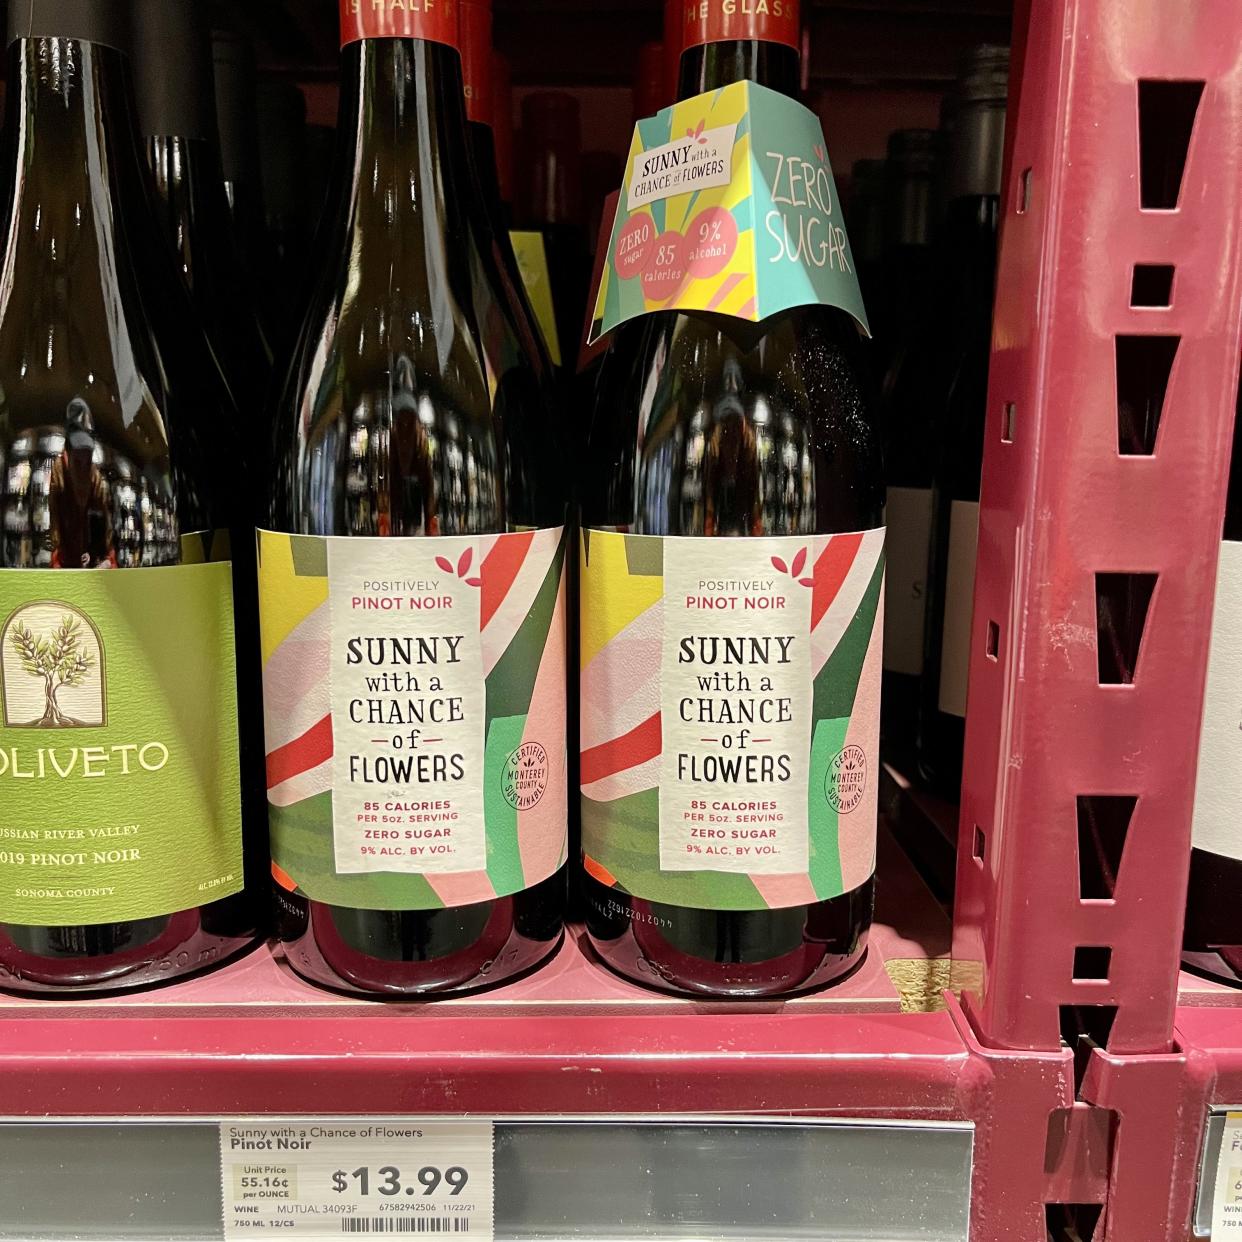 Sunny With a Chance of Flower Pinot Noir at whole foods